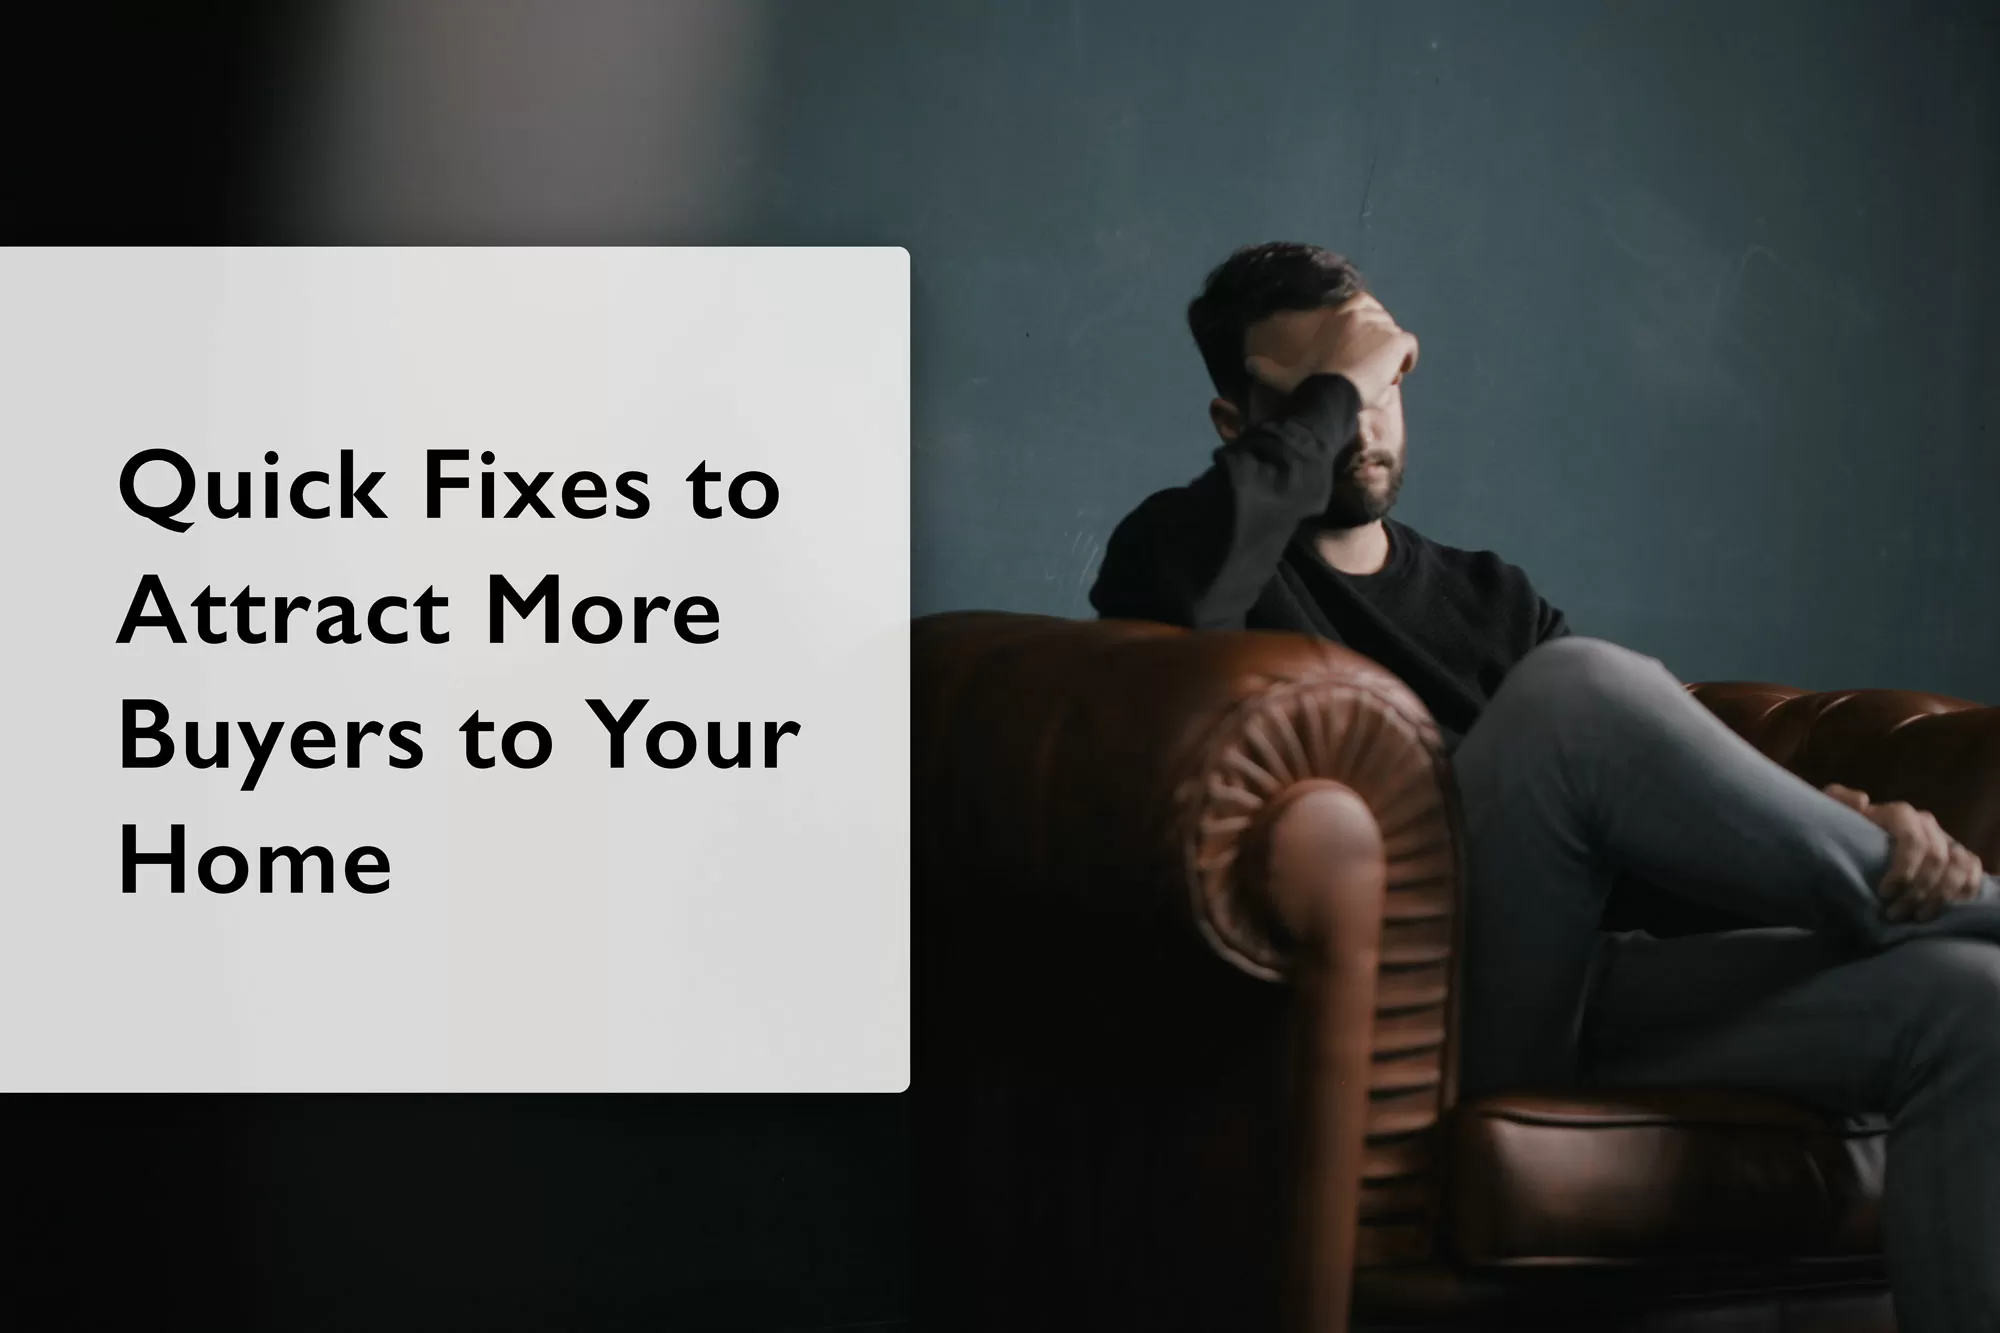 Quick Fixes to Attract More Buyers to Your Home